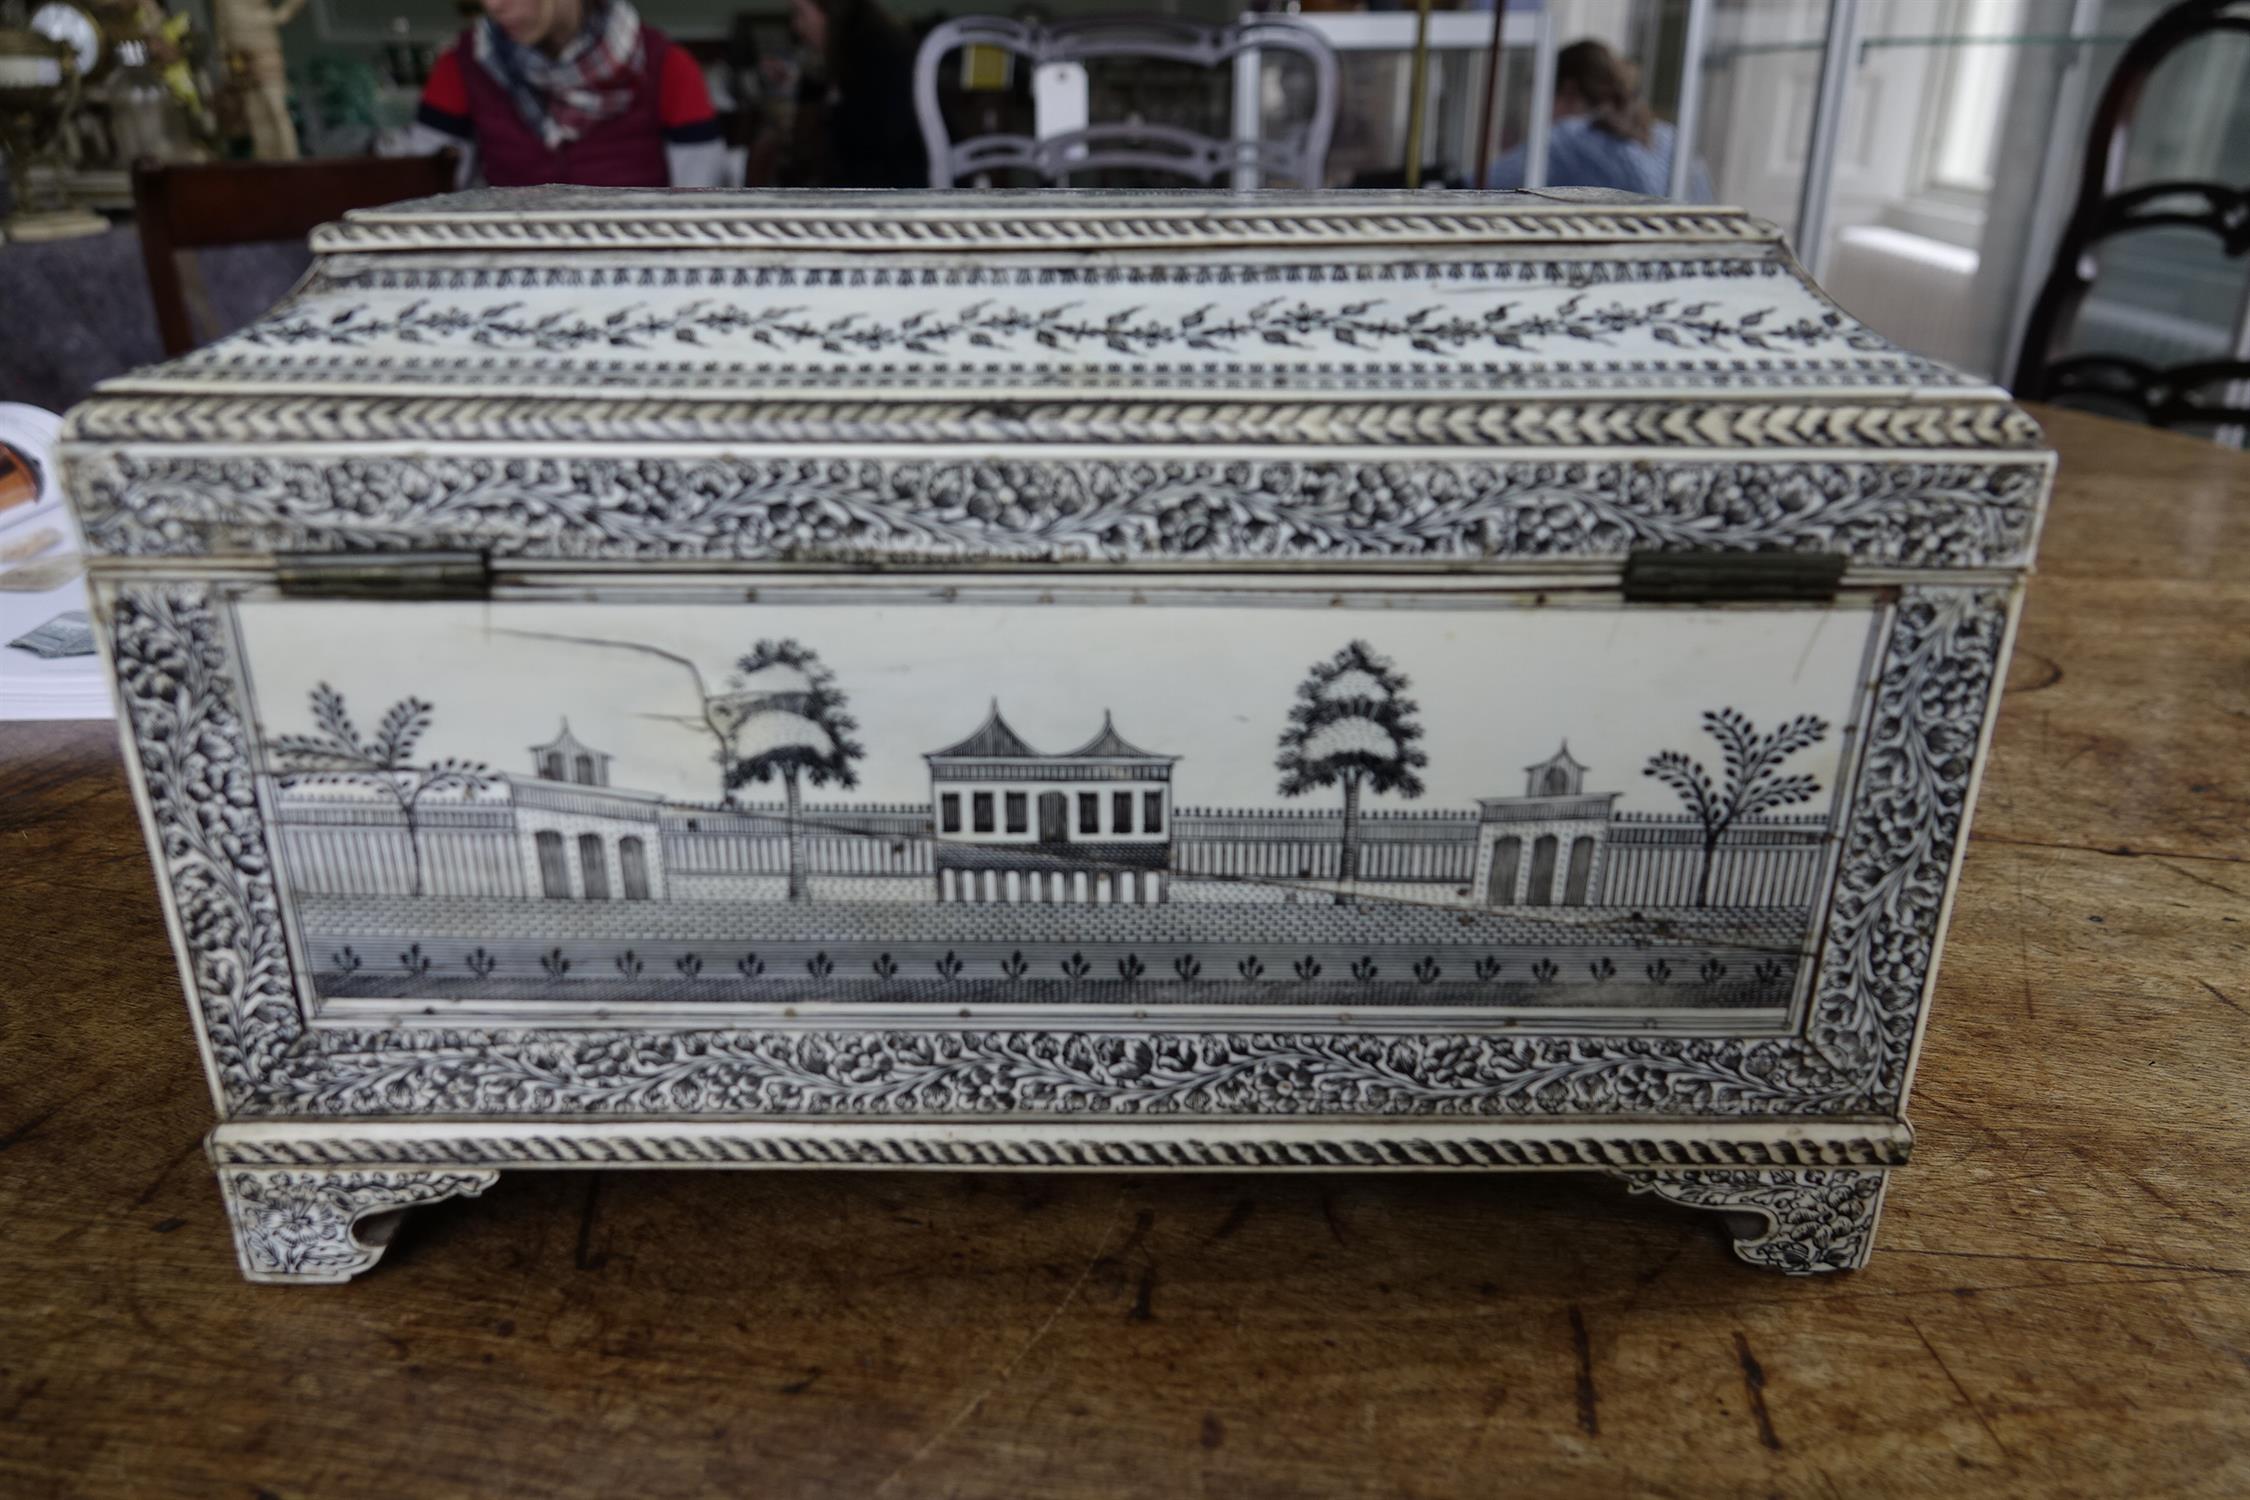 AN ANGLO-INDIAN VIZAGAPATAM TEA CASKET, c.1800, engraved overall in black ink with foliate borders - Image 7 of 22